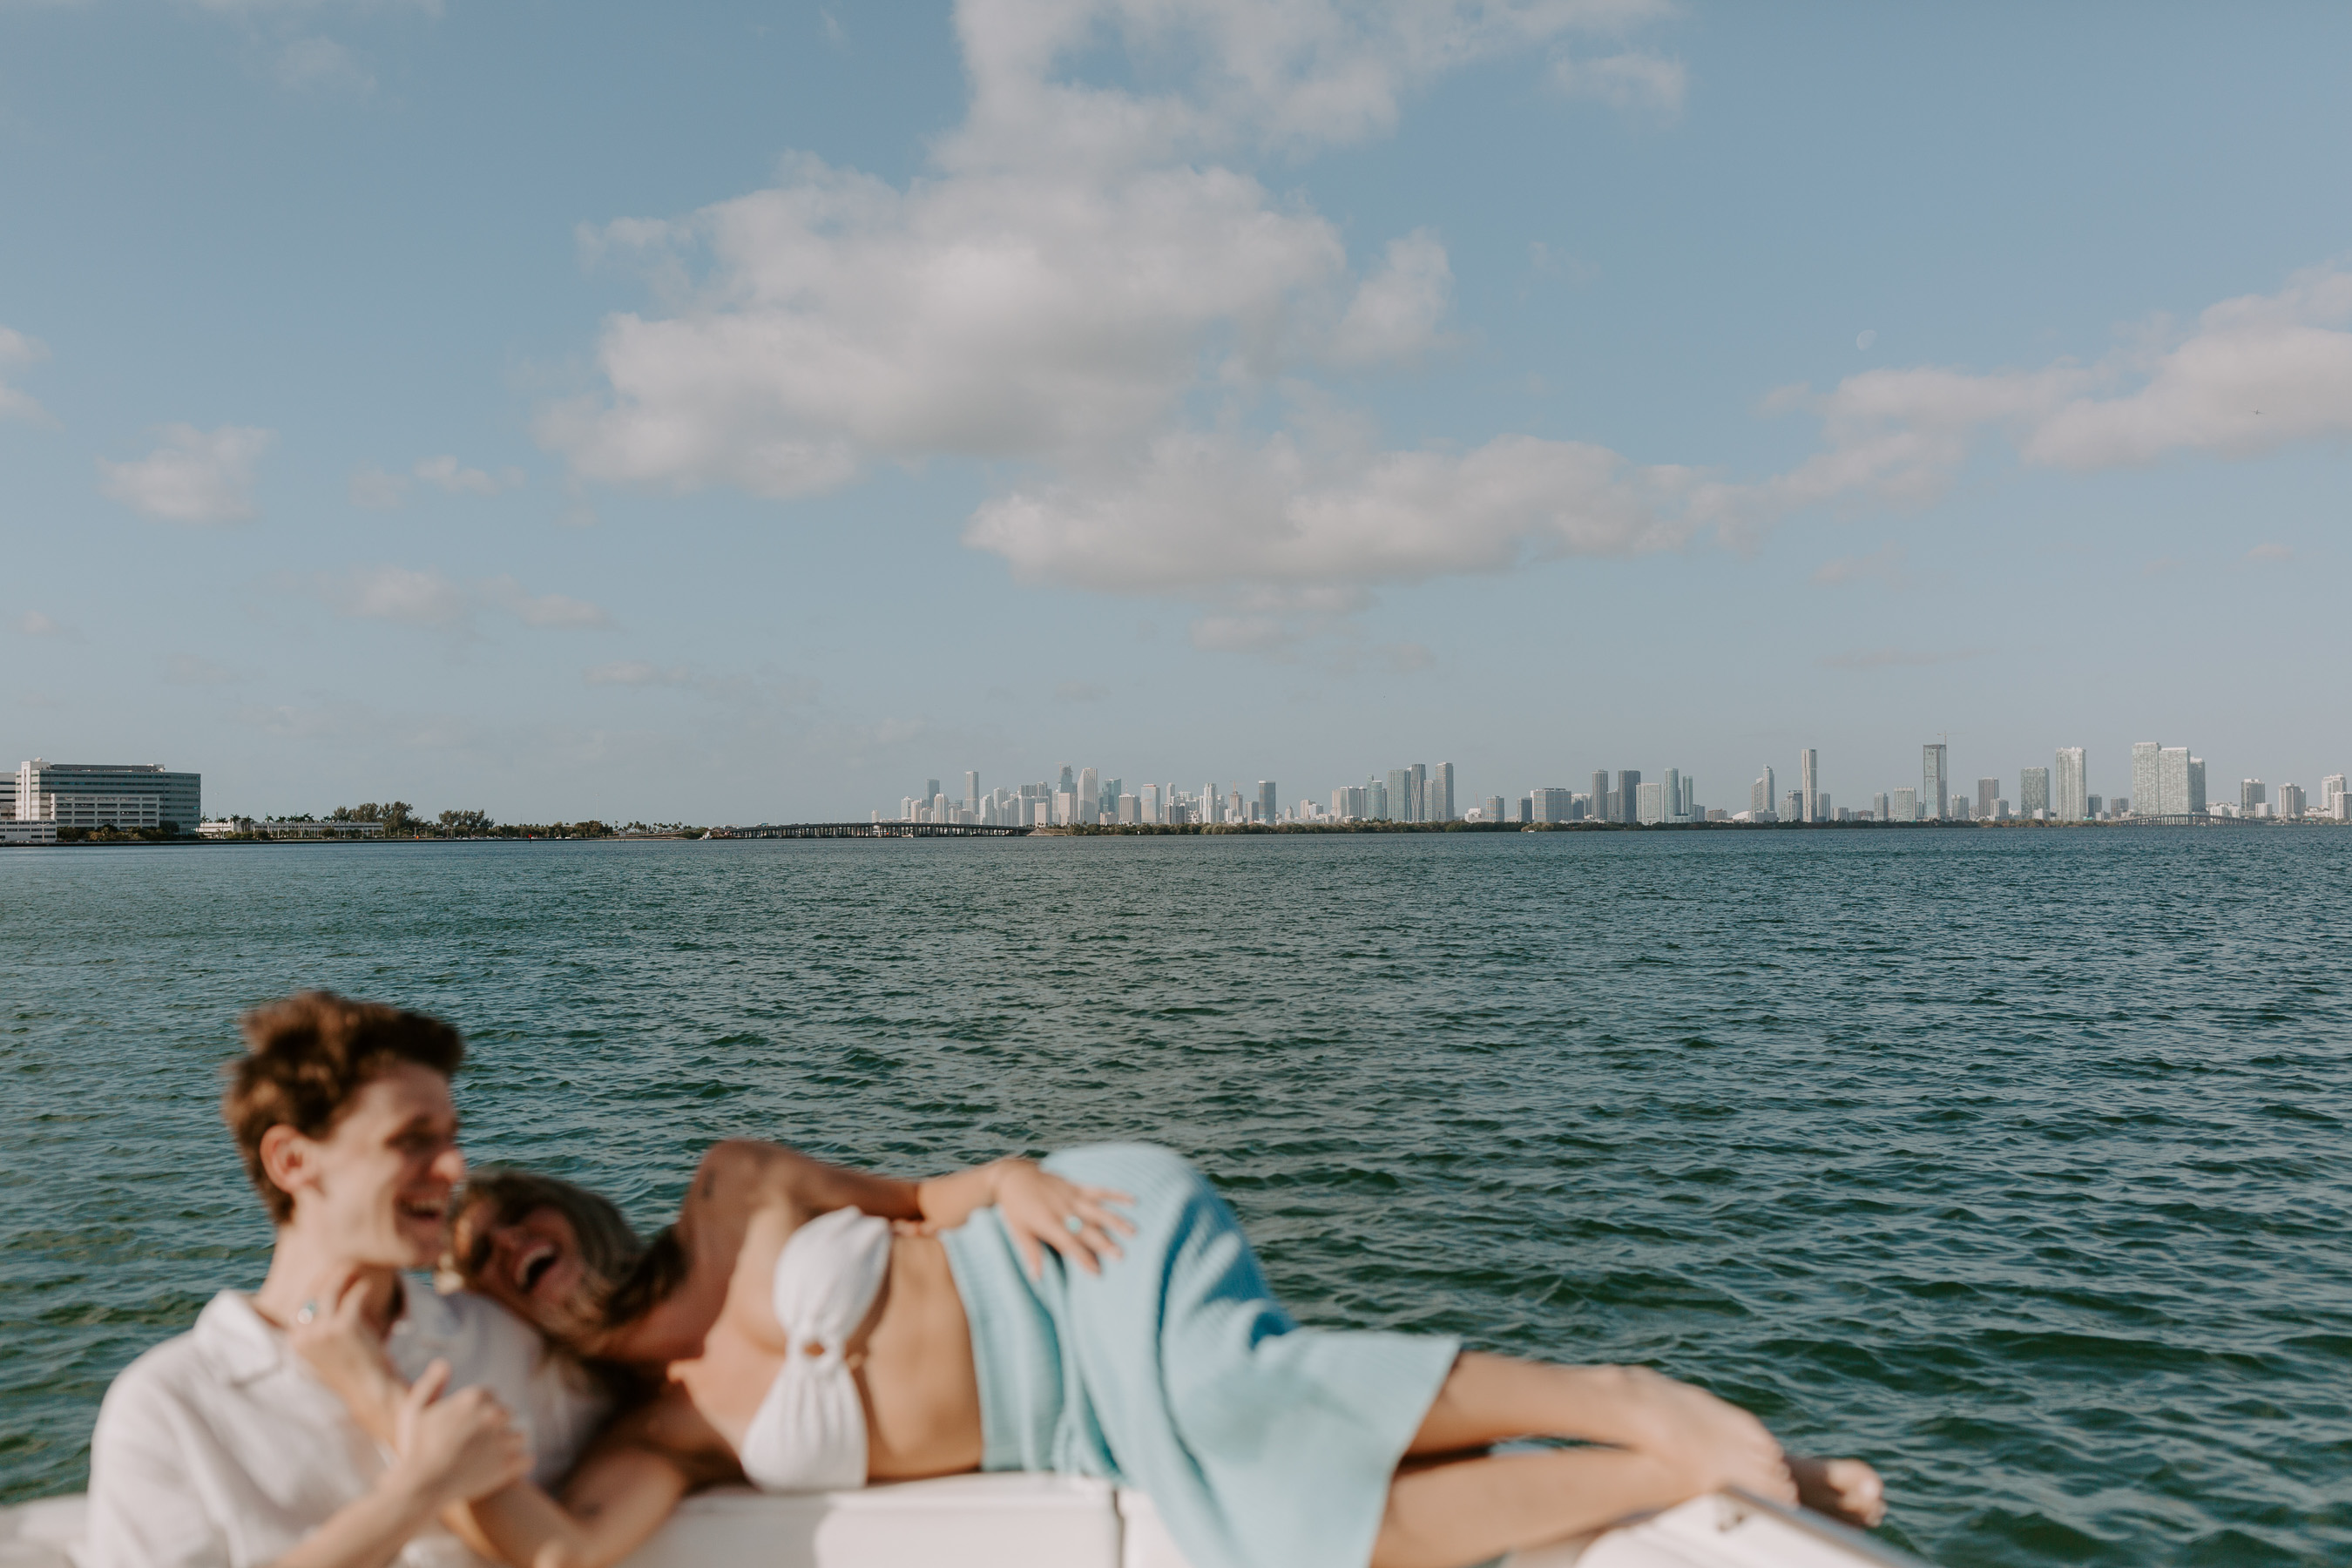 Lounging lovers on a boat in Miami